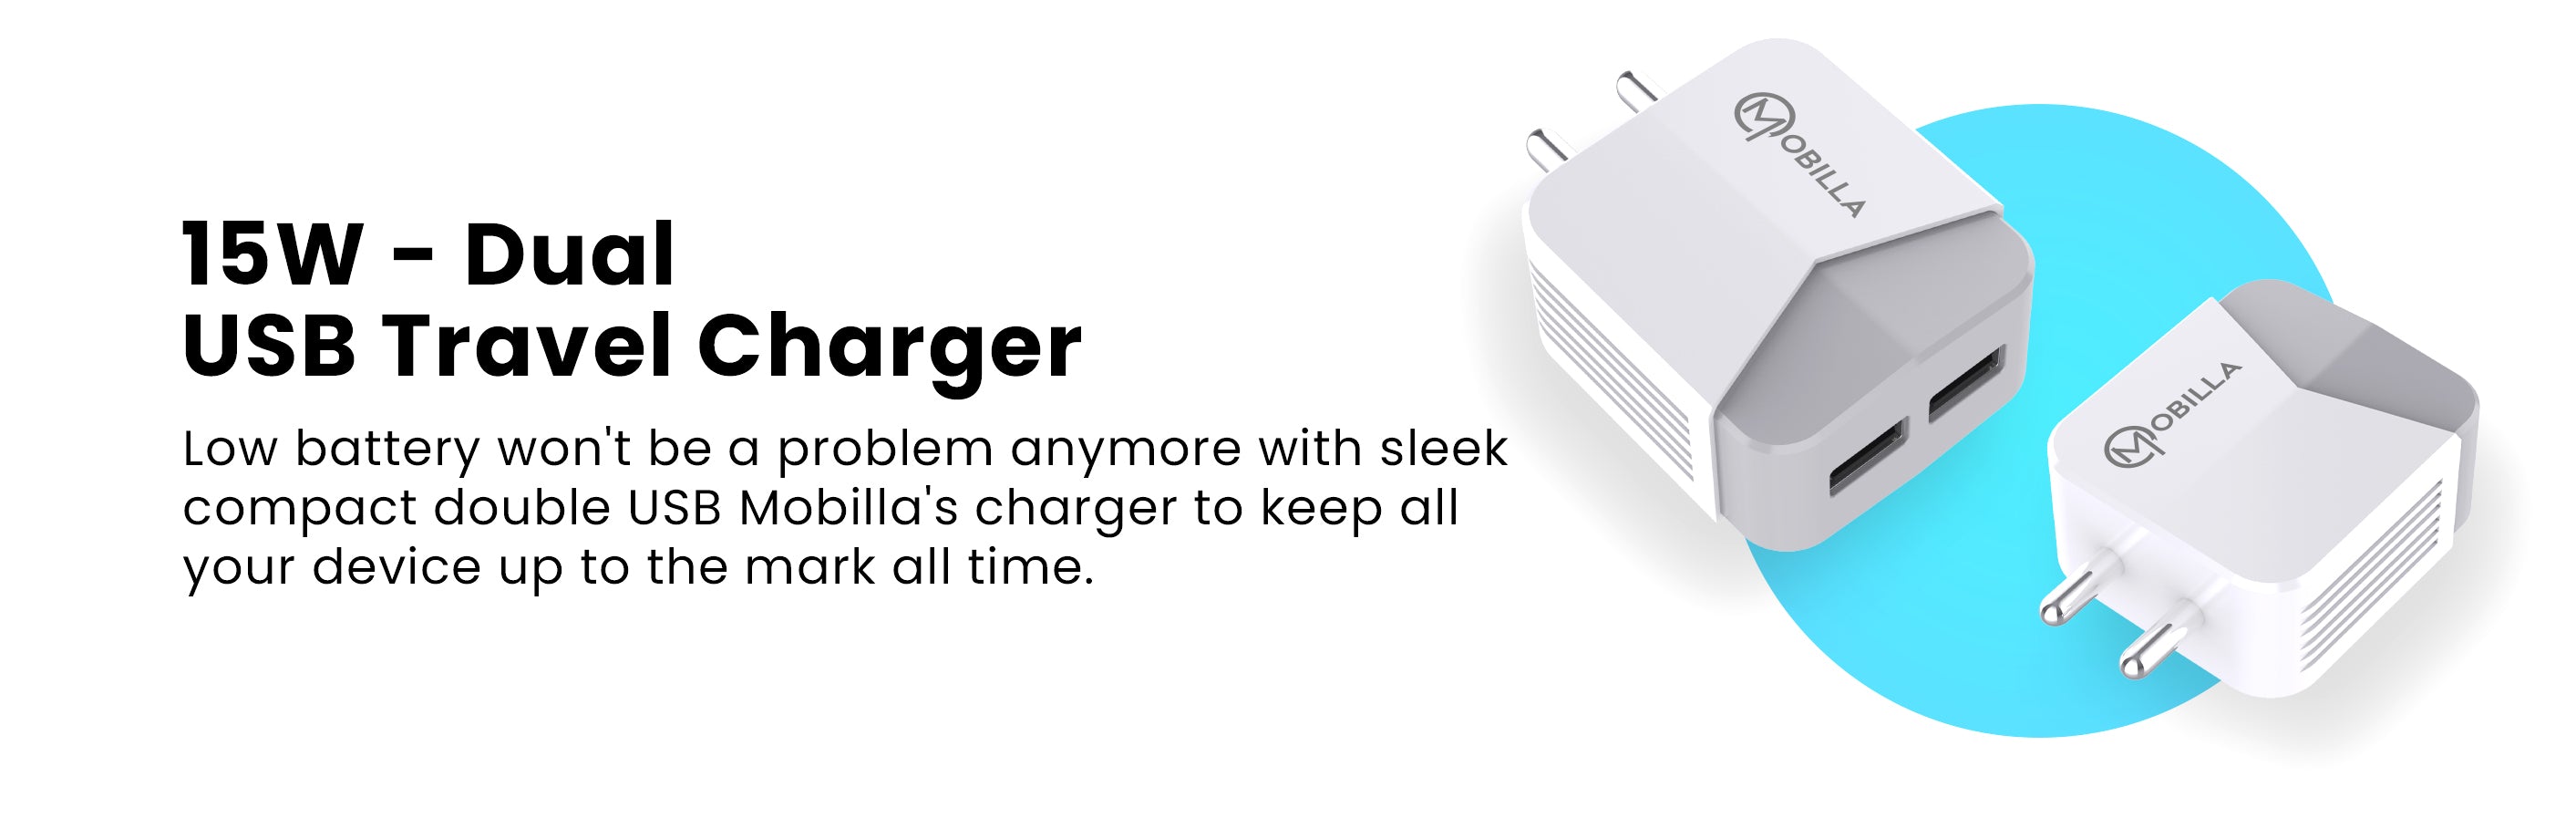 Instant Charge